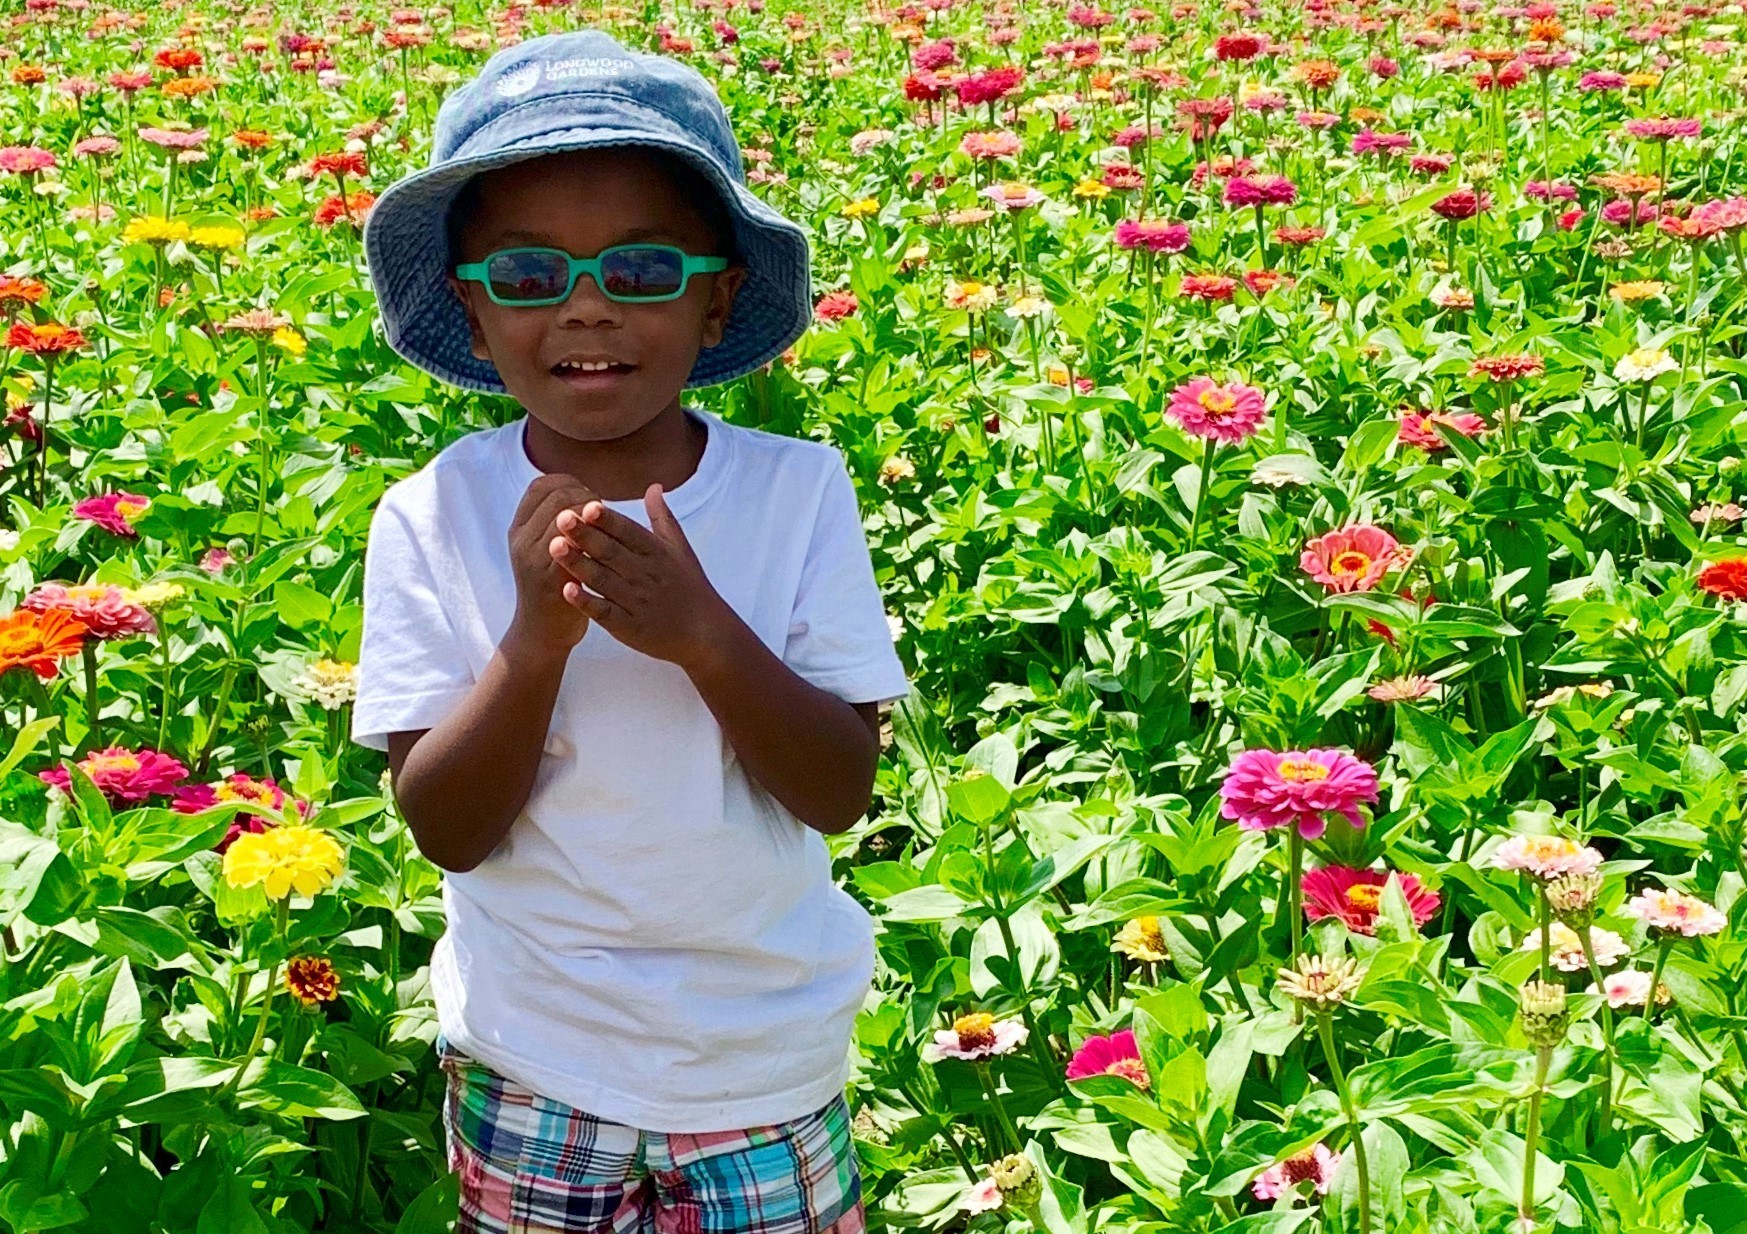 A young boy who is deaf-blind is standing among wildflowers wearing a hat and glasses.